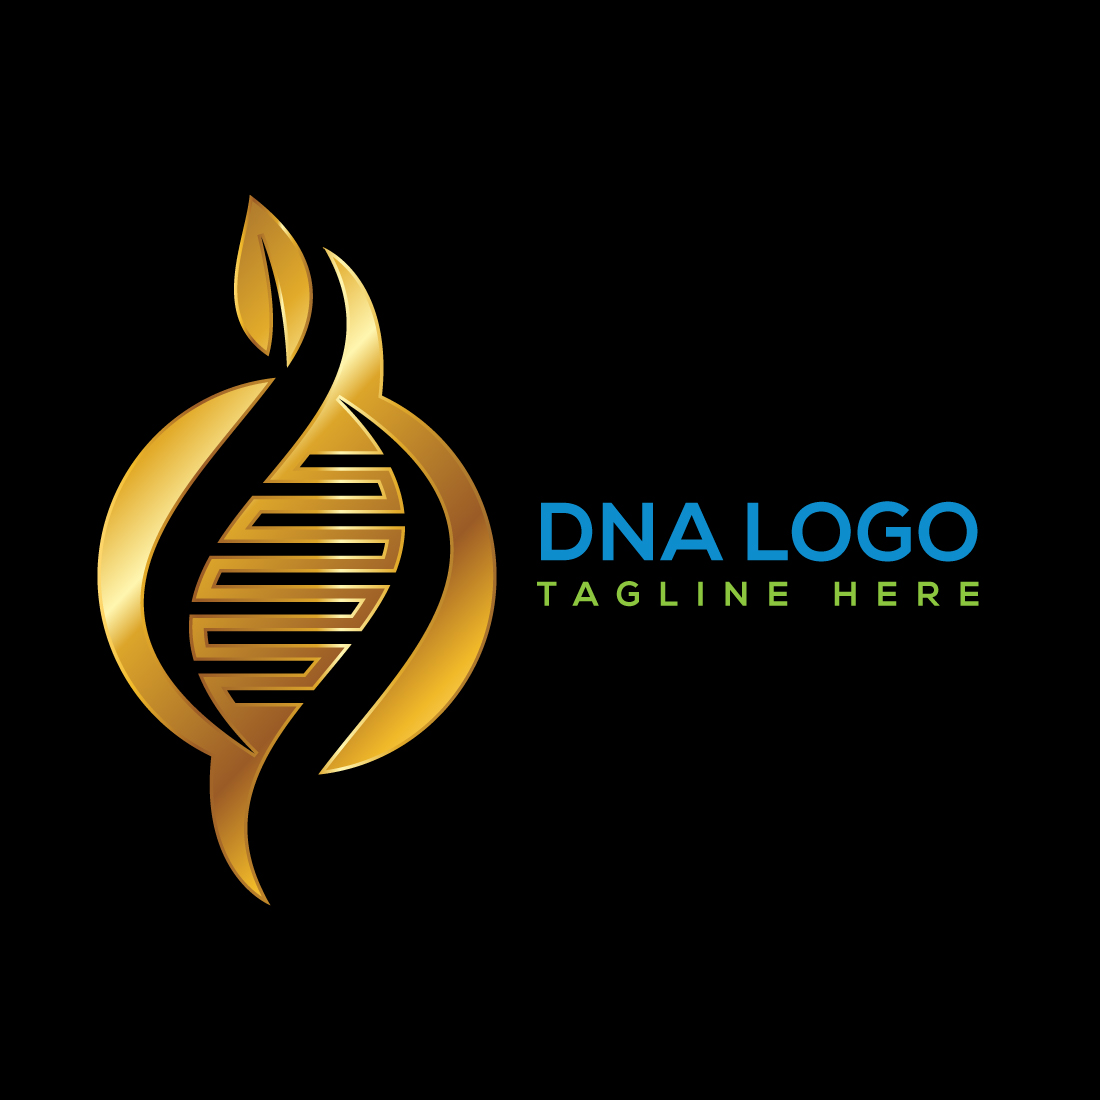 An image of an enchanting logo in the form of DNA on a black background.